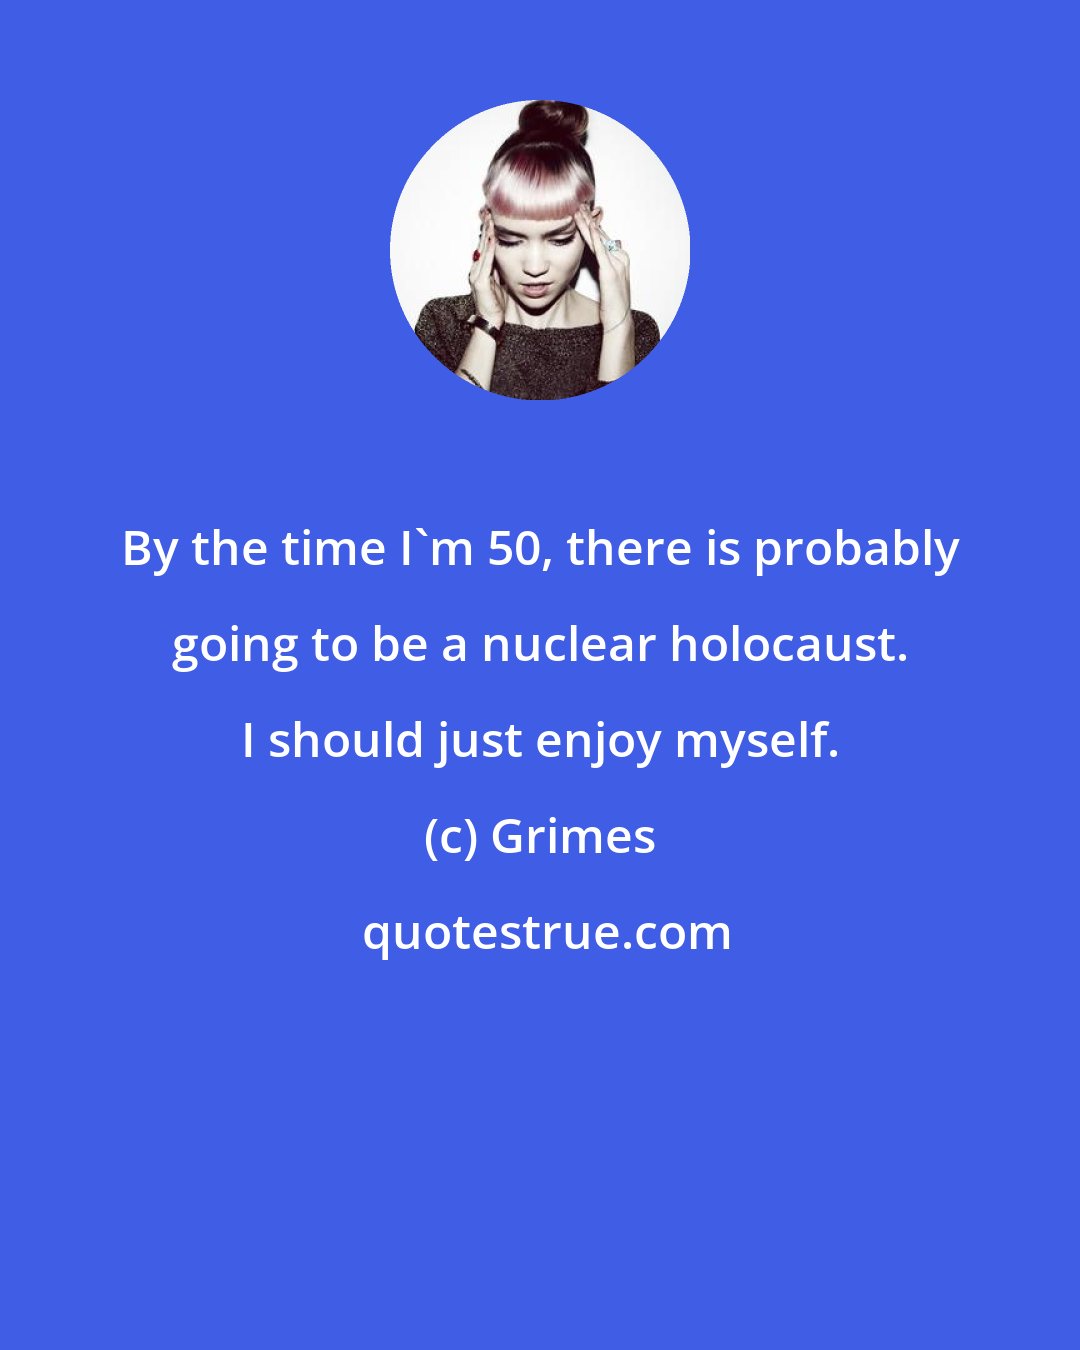 Grimes: By the time I'm 50, there is probably going to be a nuclear holocaust. I should just enjoy myself.